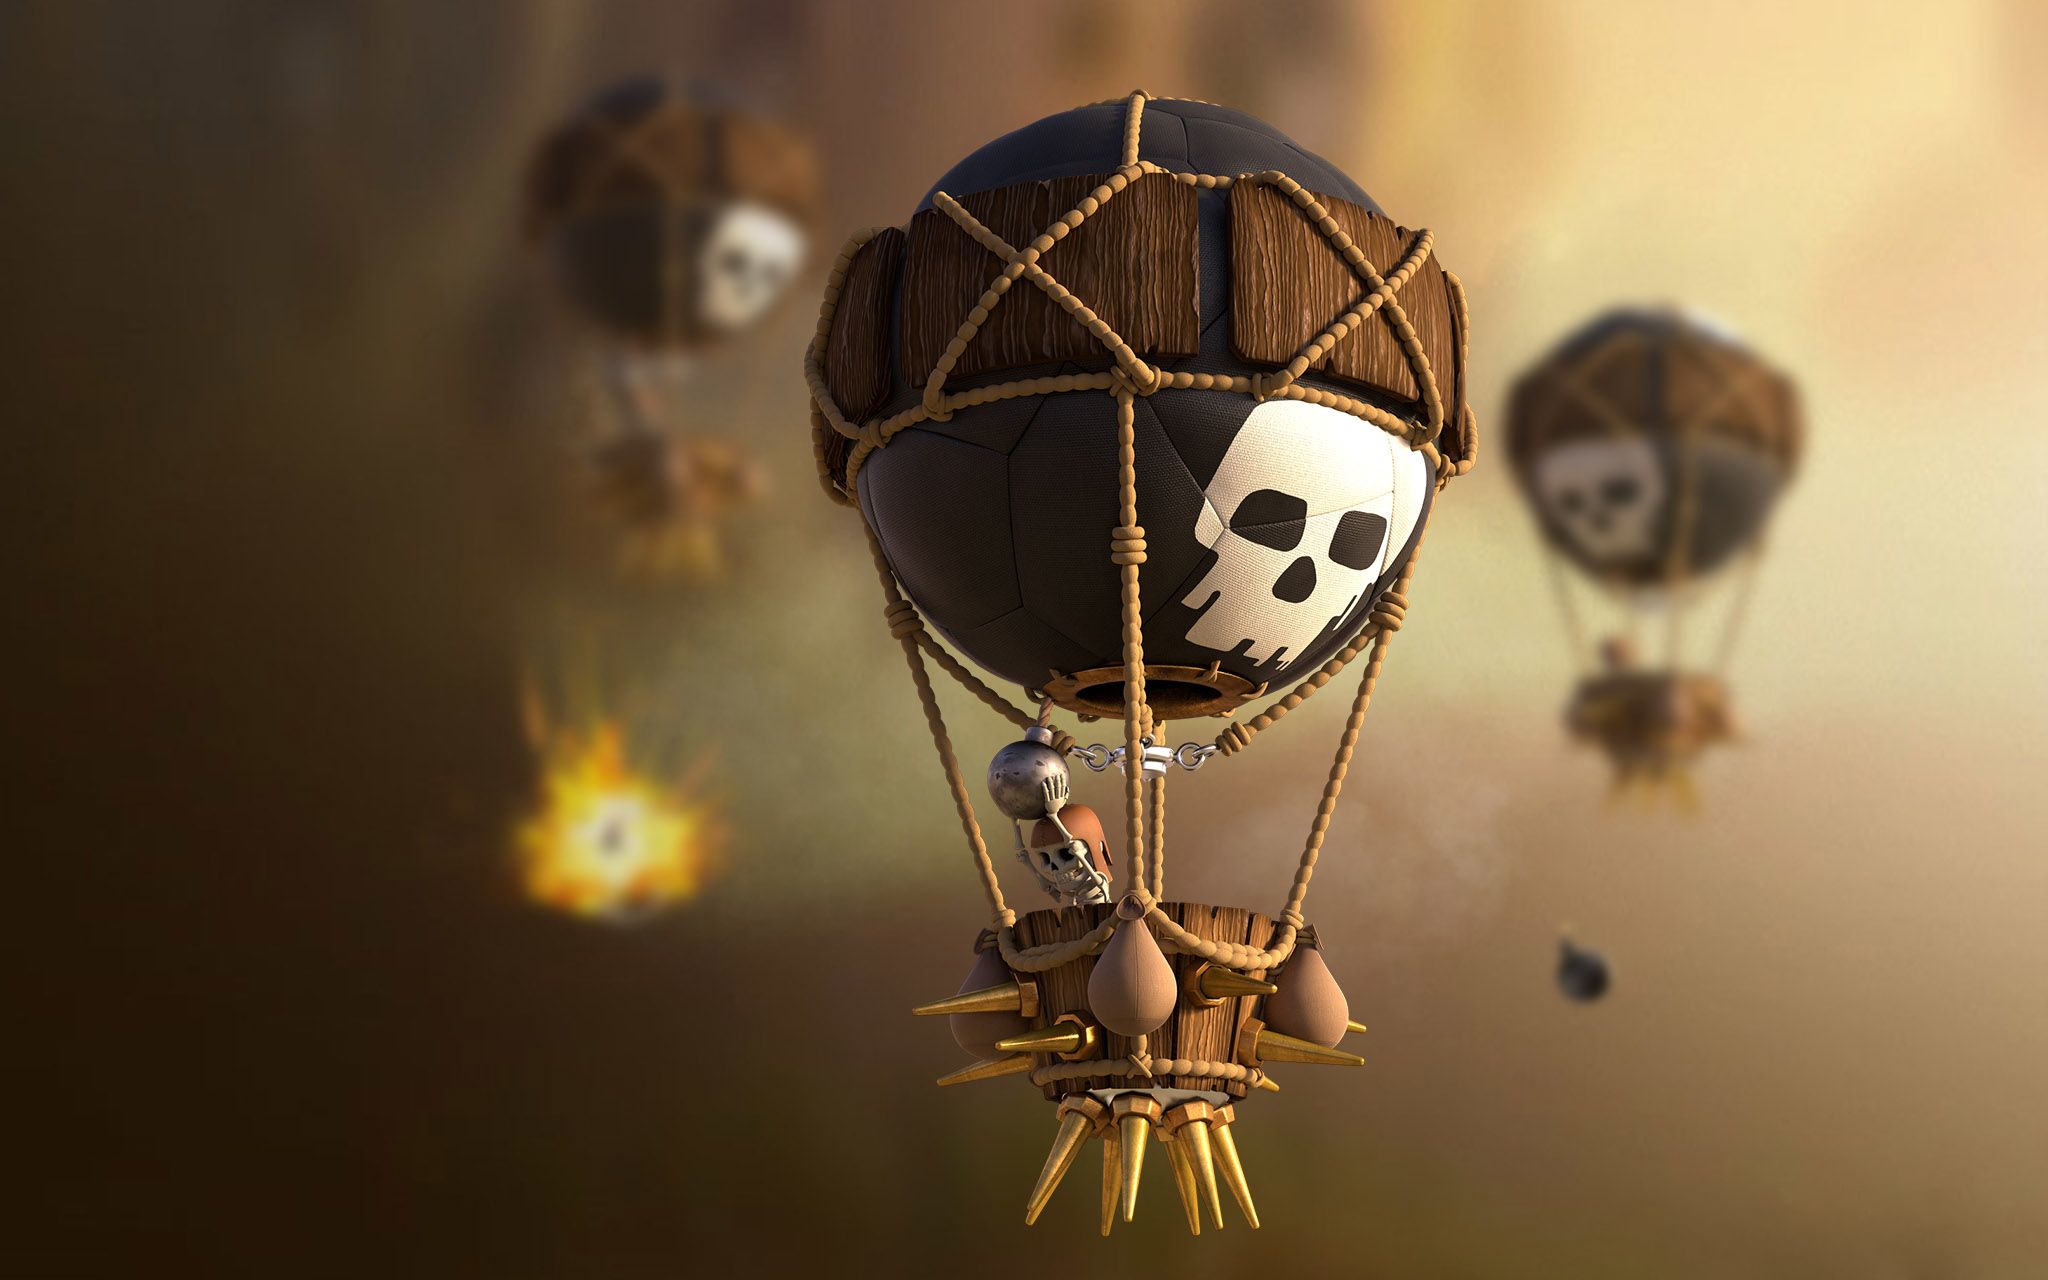 Clash Of Clans Balloons Wallpaper, HD Games 4K Wallpaper, Image, Photo and Background